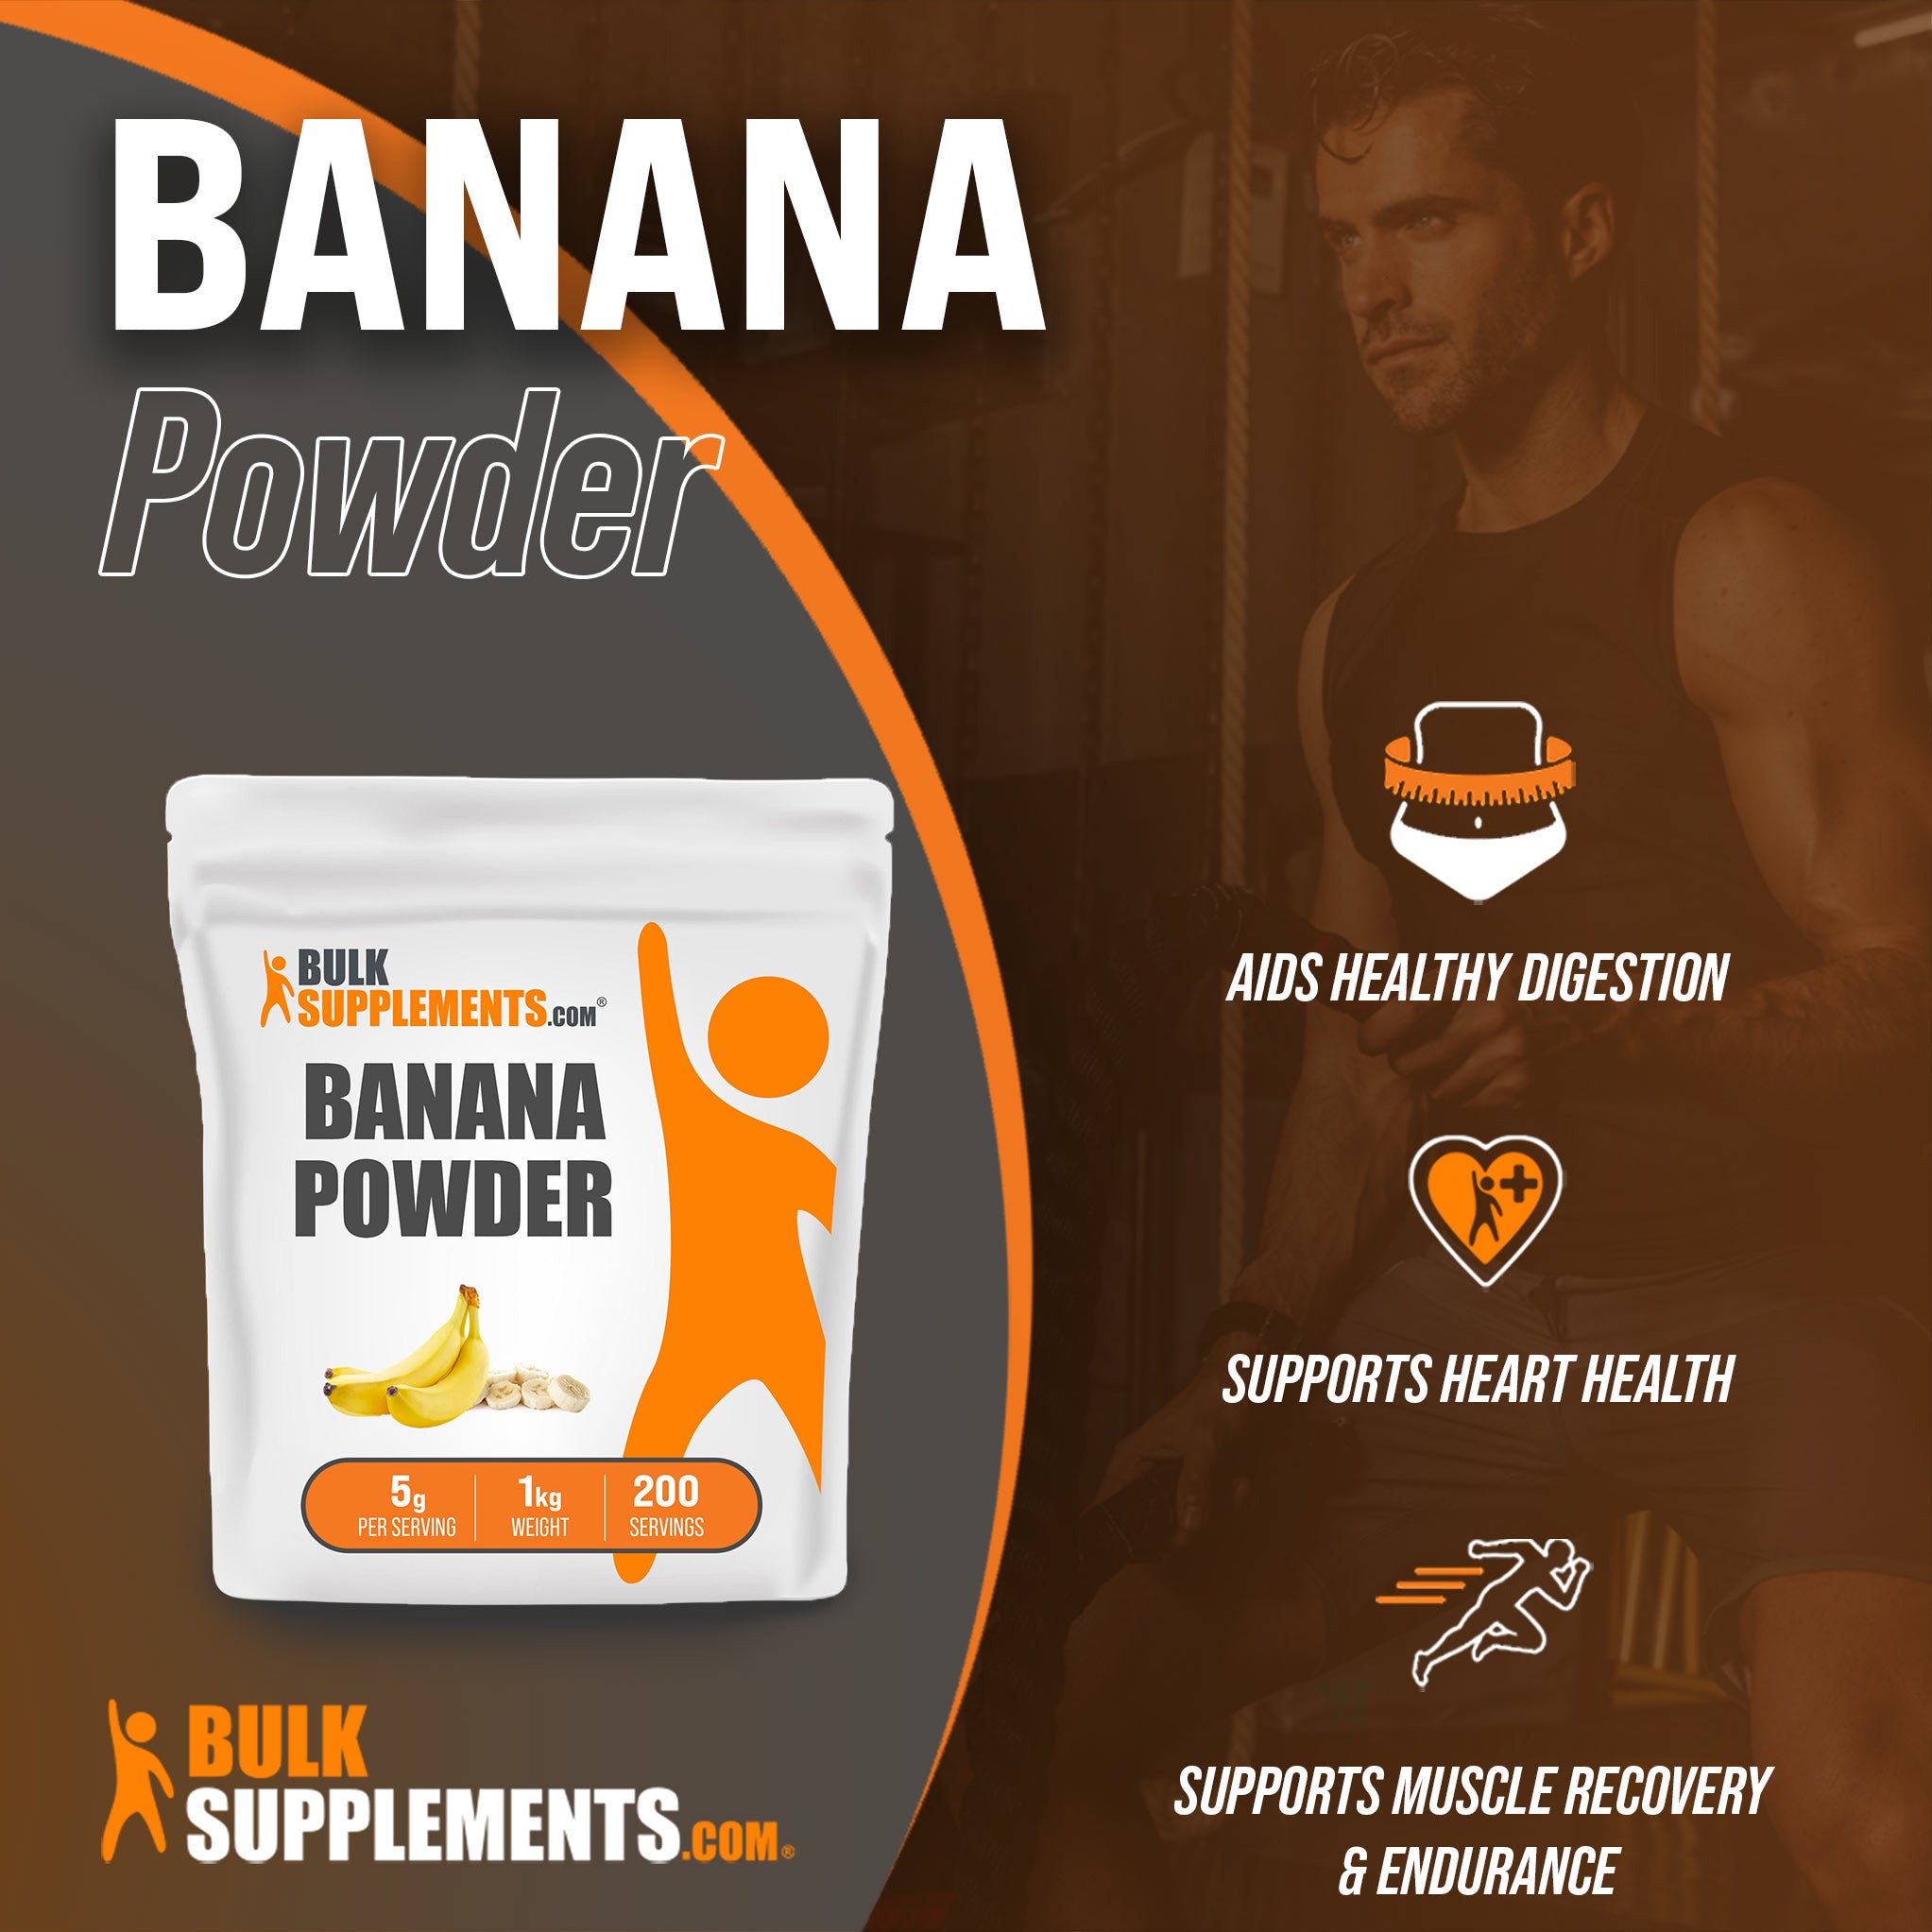 Banana Loose Powder from Bulk Supplements, great for digestion, heart health and muscle recovery